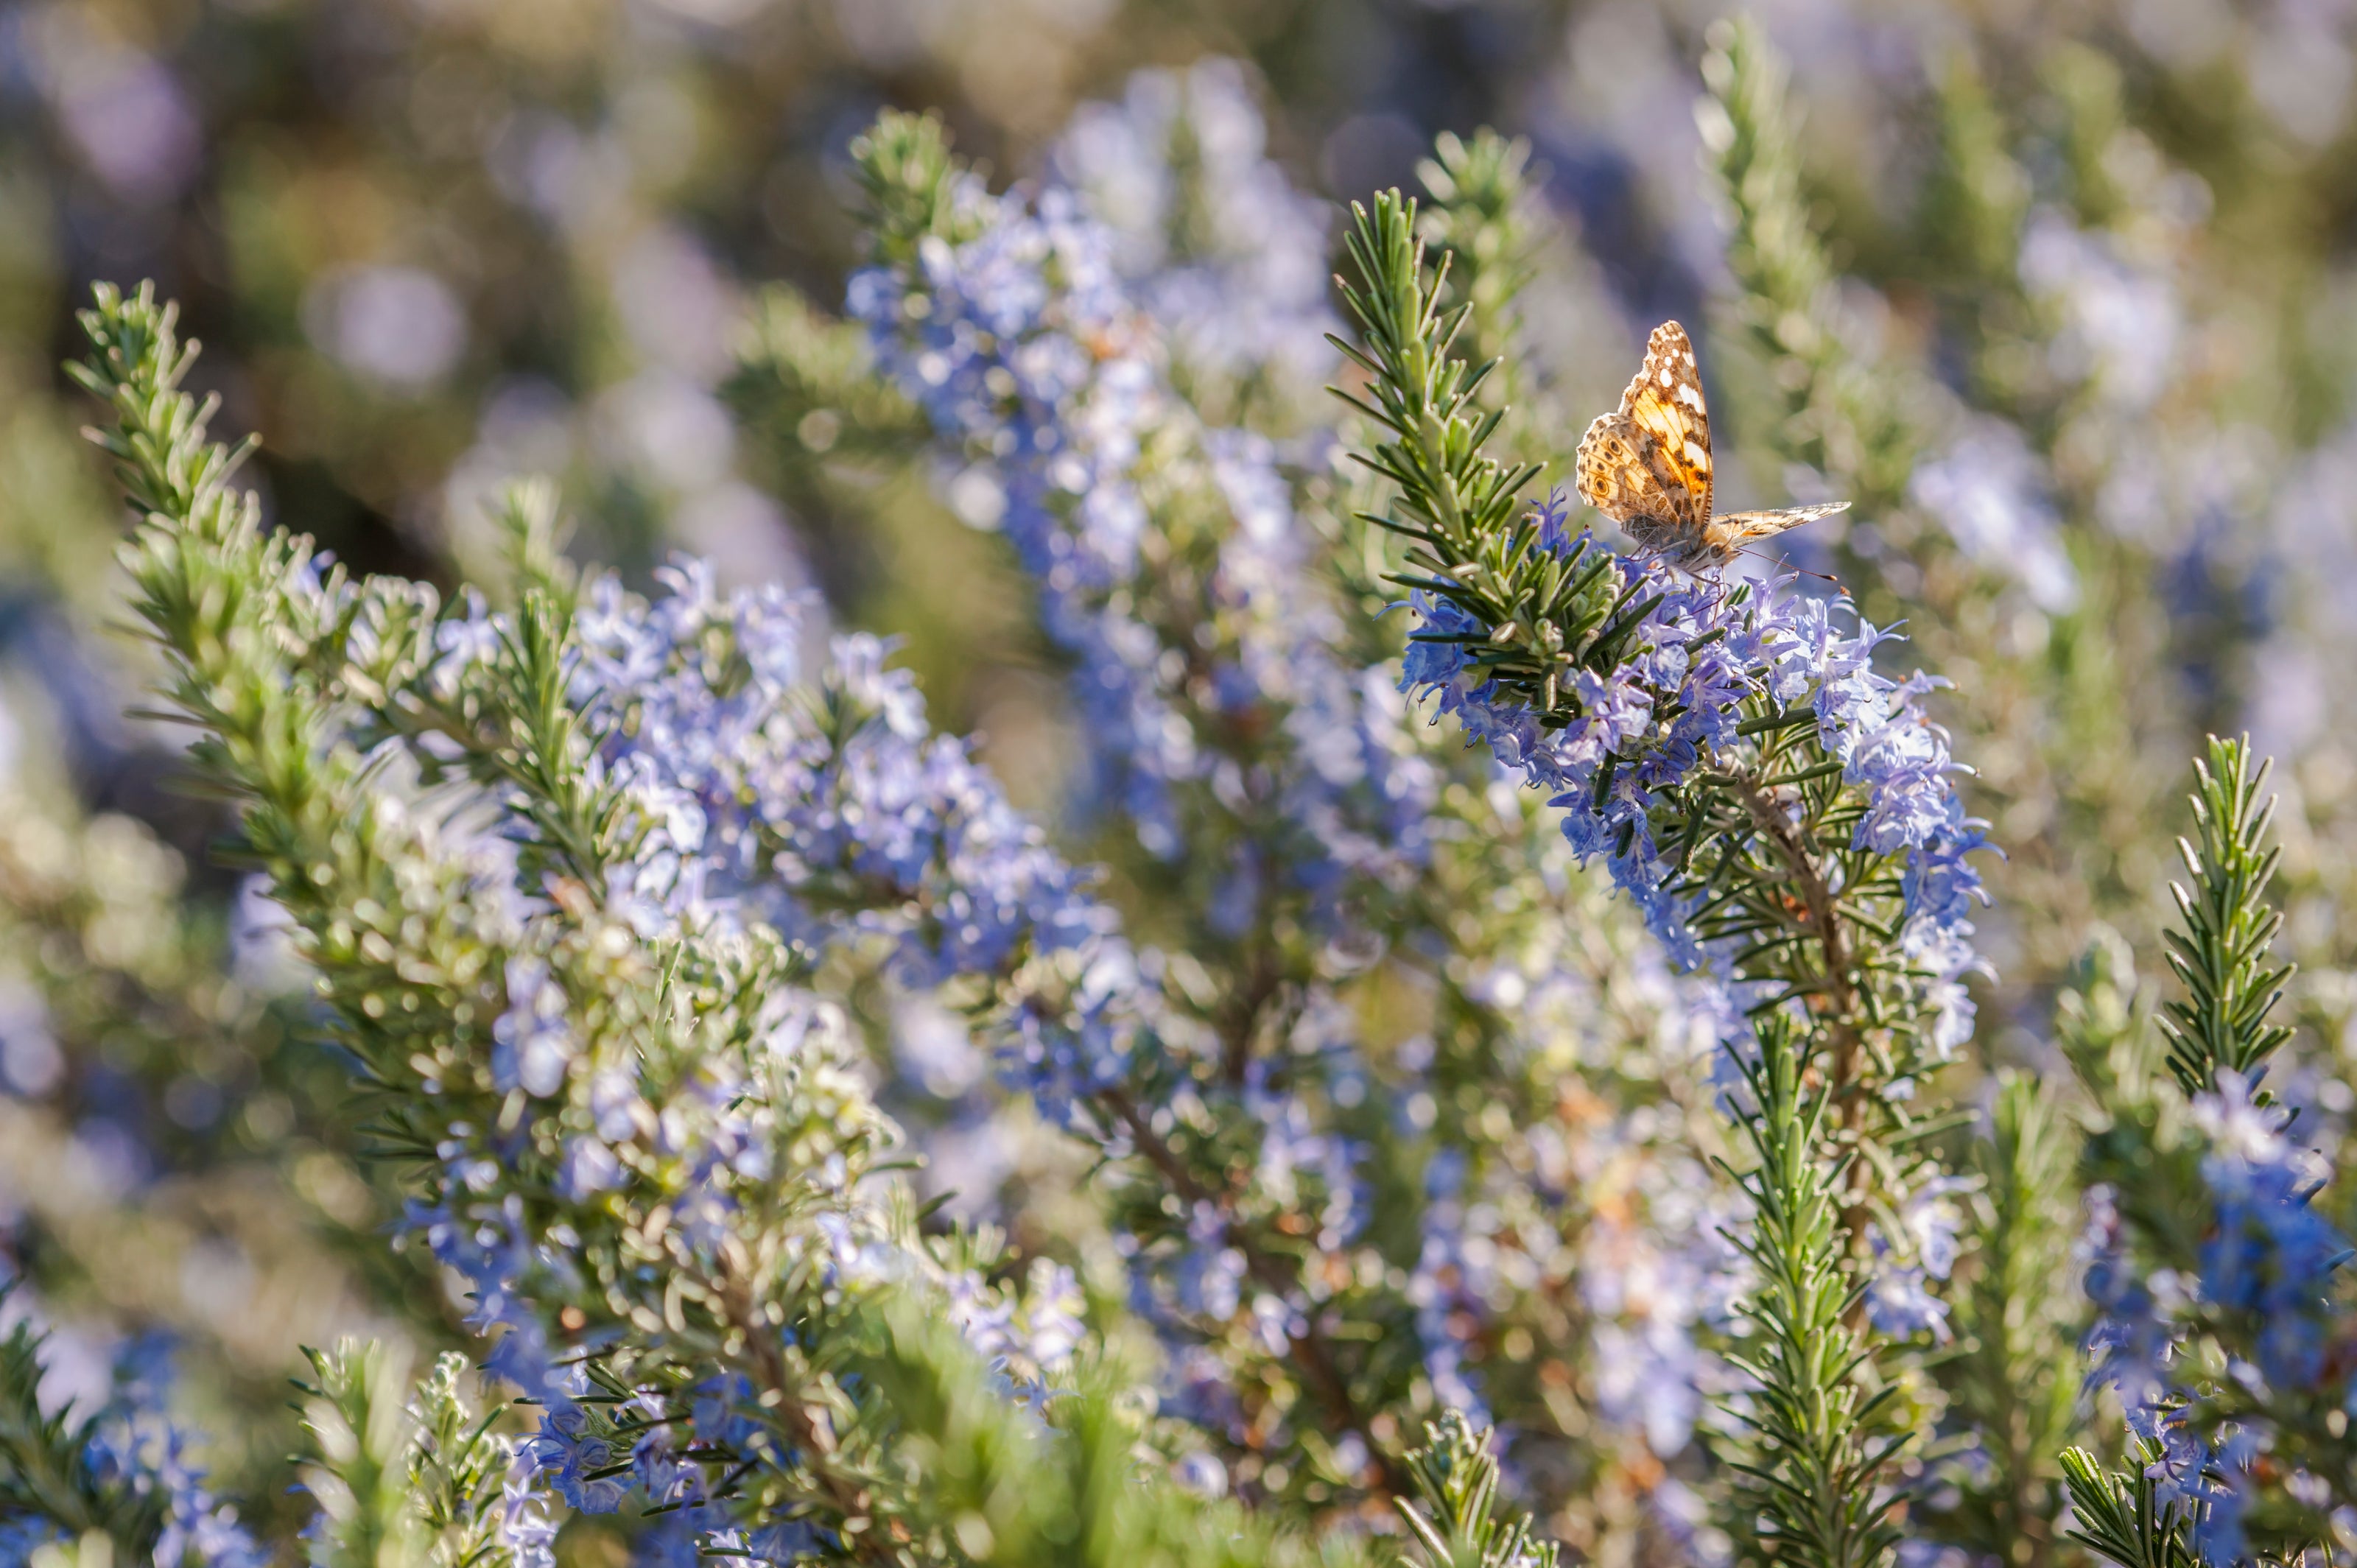 Rosemary blowing in the wind with a butterfly to display Rosemary for beard growth